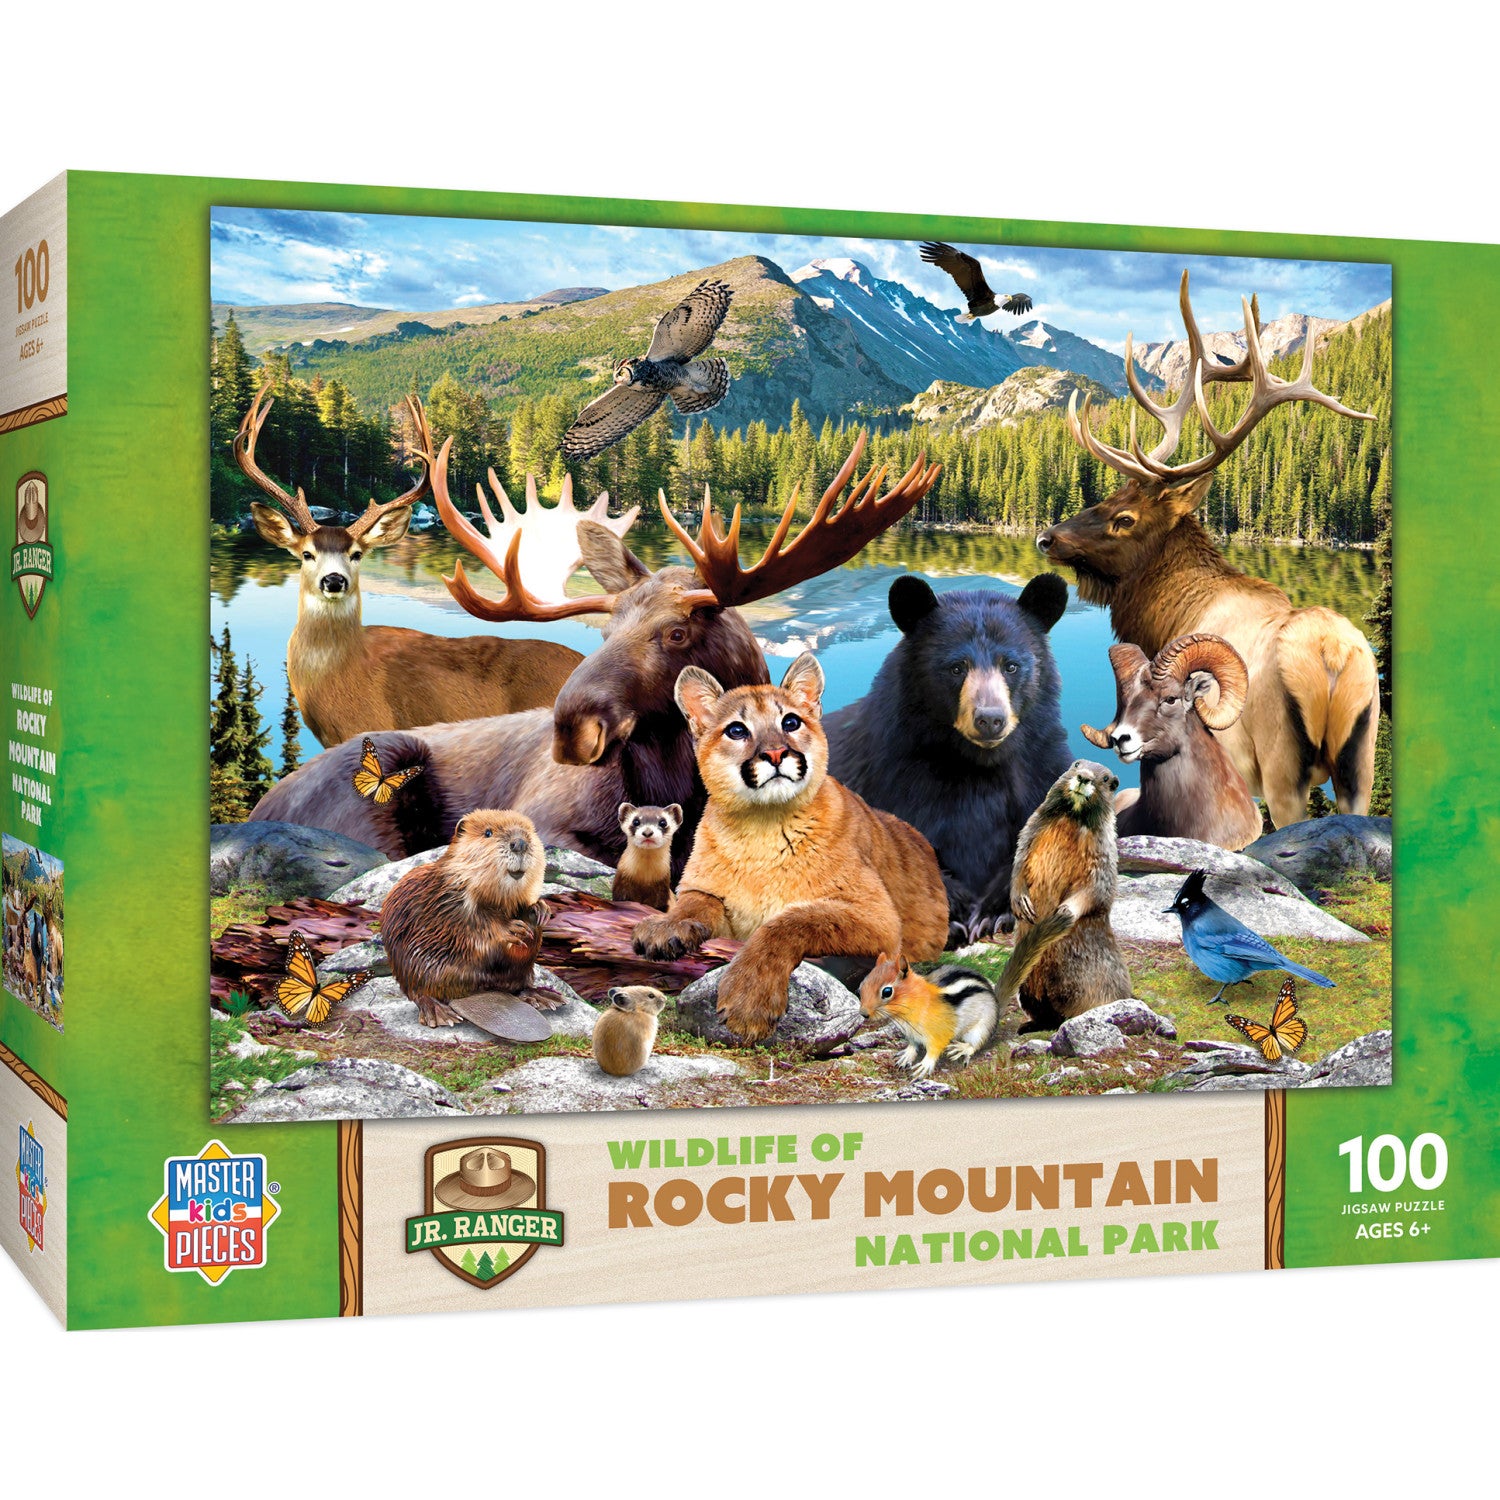 Wildlife of Rocky Mountain National Park - 100 Piece Puzzle